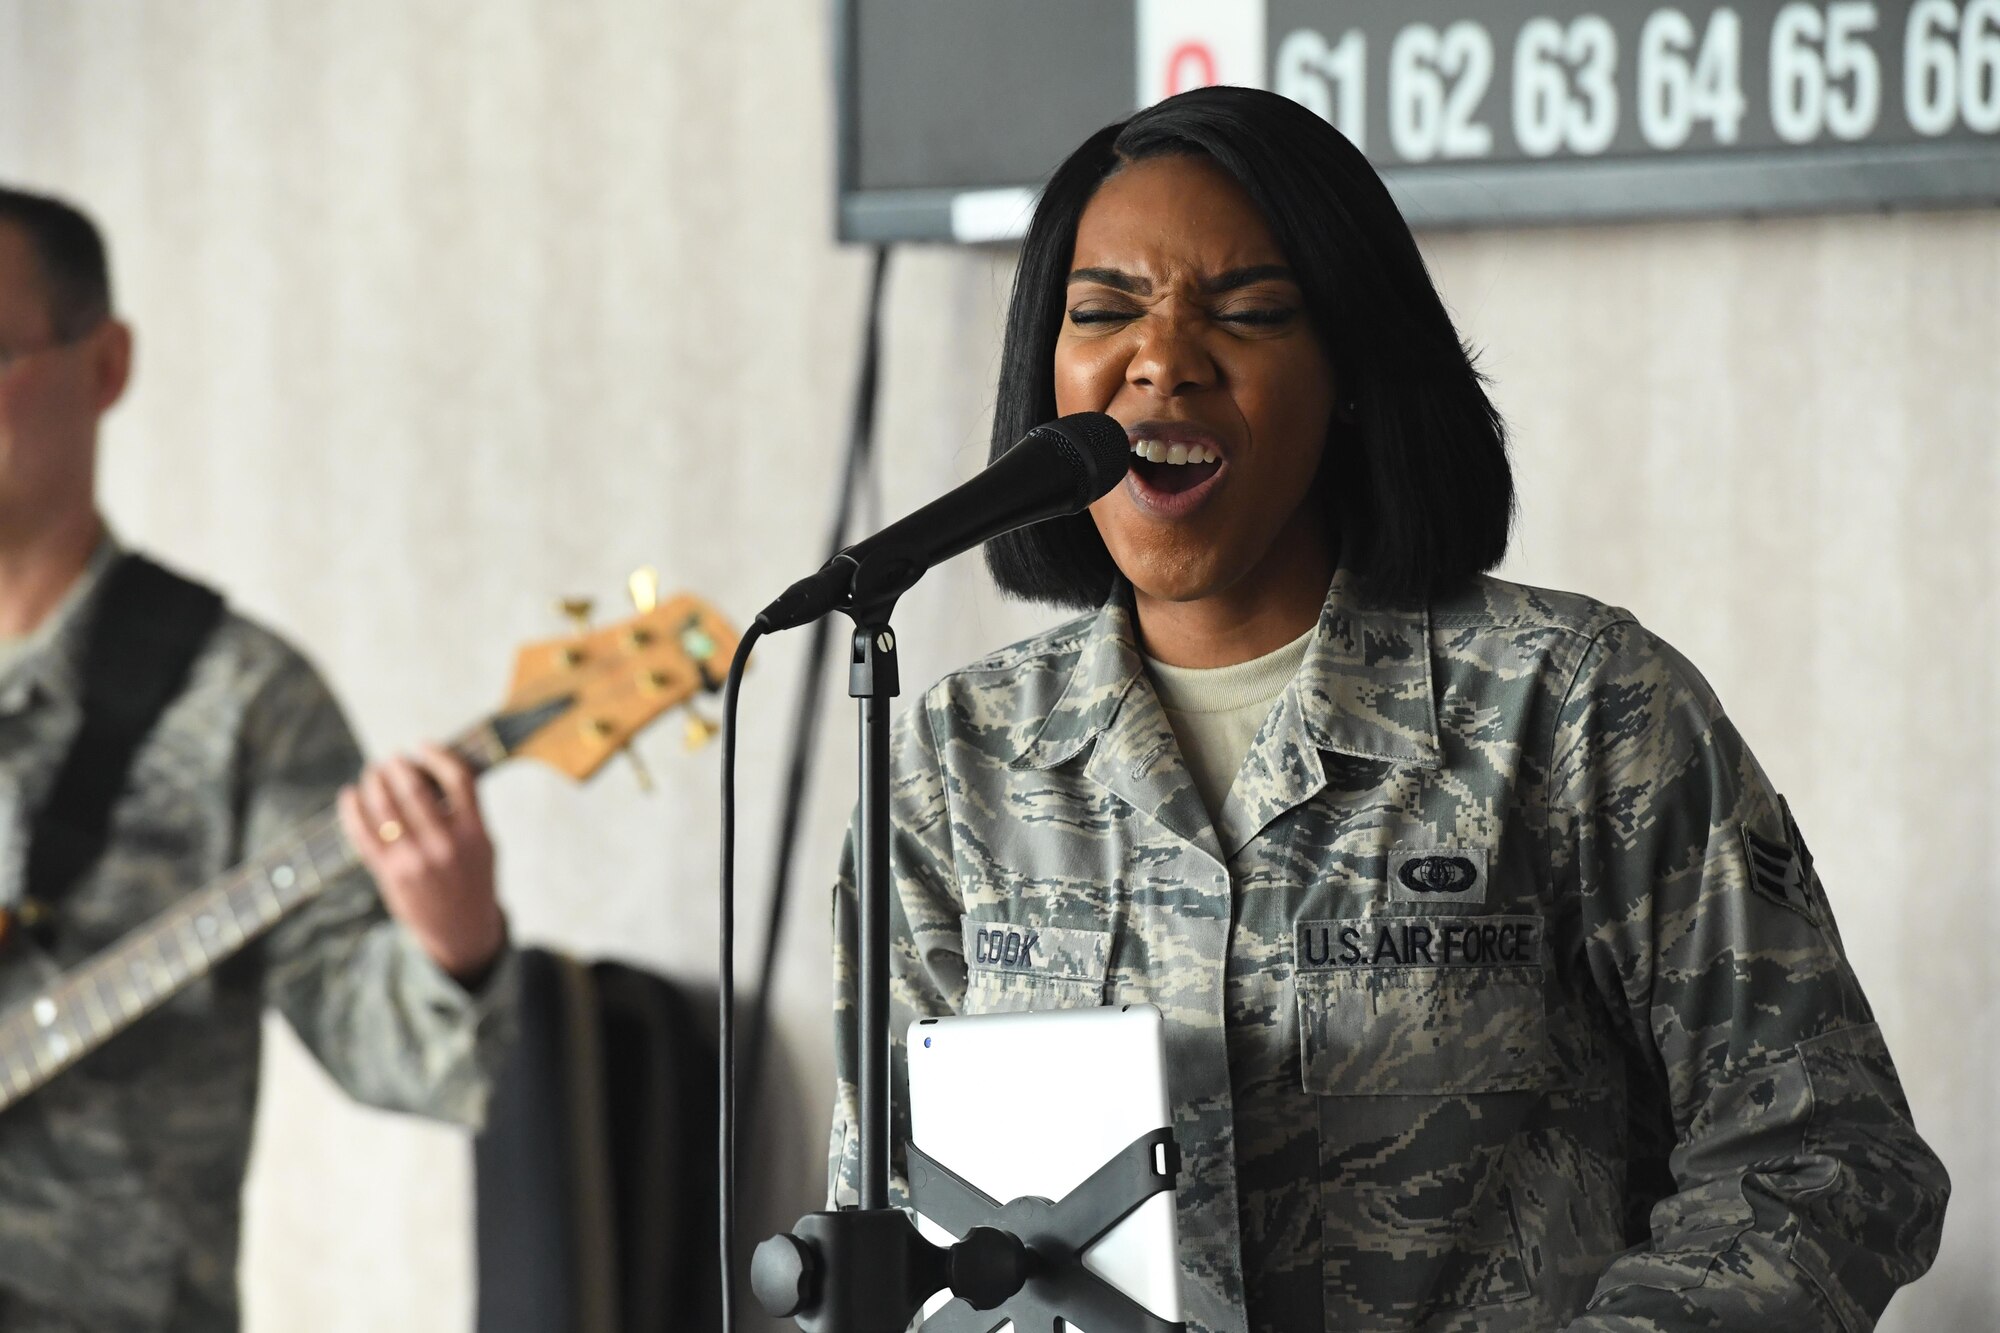 Senior Airman Ashley Cook, a vocalist with the U.S. Air Force Heritage of America Band’s Blue Aces, sings during a holiday concert at the Hampton Veteran’s Medical Center, Dec. 7, 2016. The event’s purpose was to inspire, honor and connect with veterans from the past and present. Since 1941, U.S. Air Force bands have inspired billions of listeners through its music, concerts and recordings. Today, they continue to positively impact the global community. (U.S. Air Force photo by Staff Sgt. Nick Wilson)